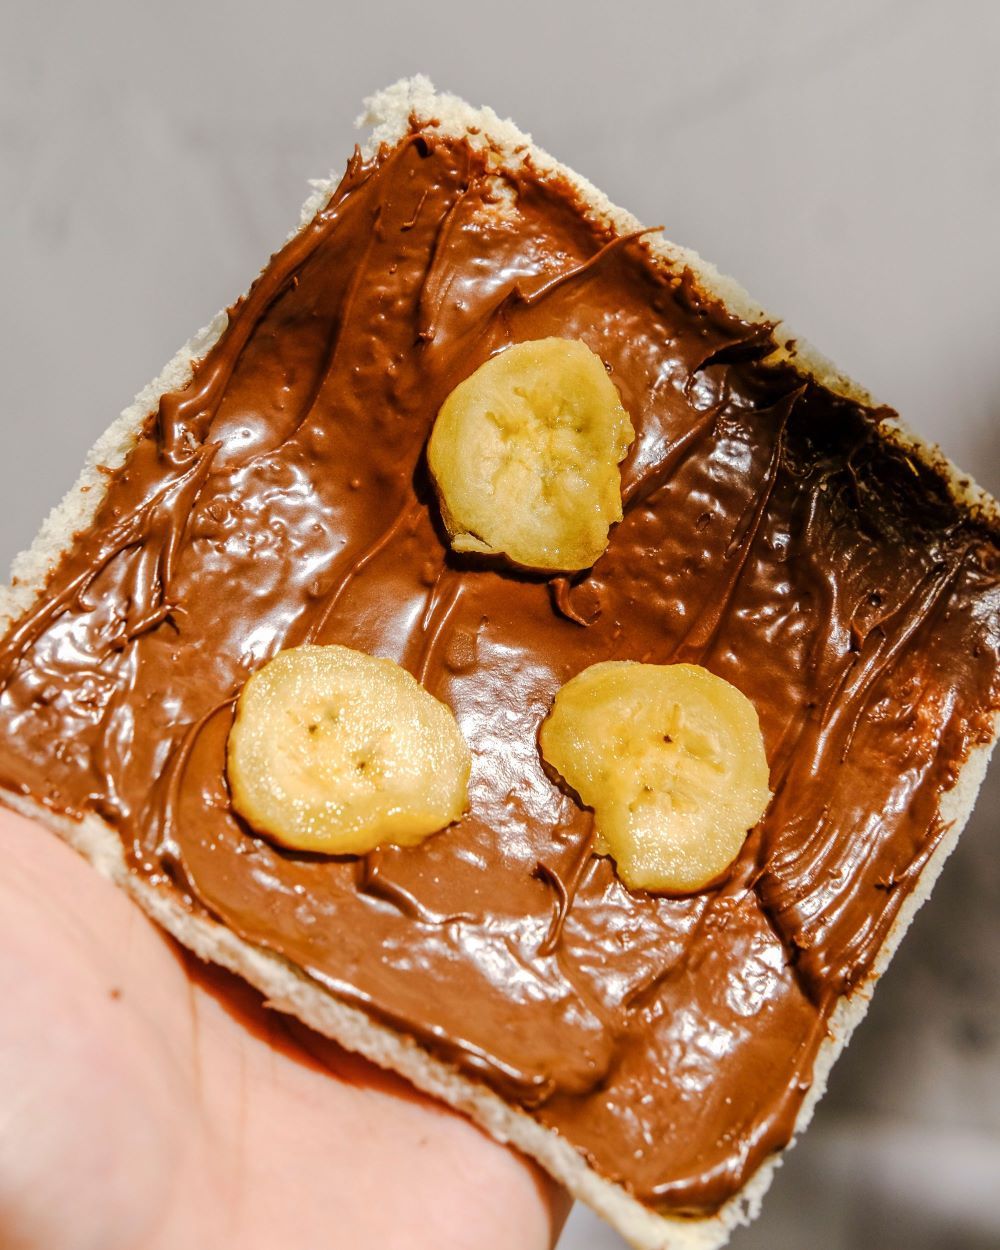 Bread with nutella and banana slices